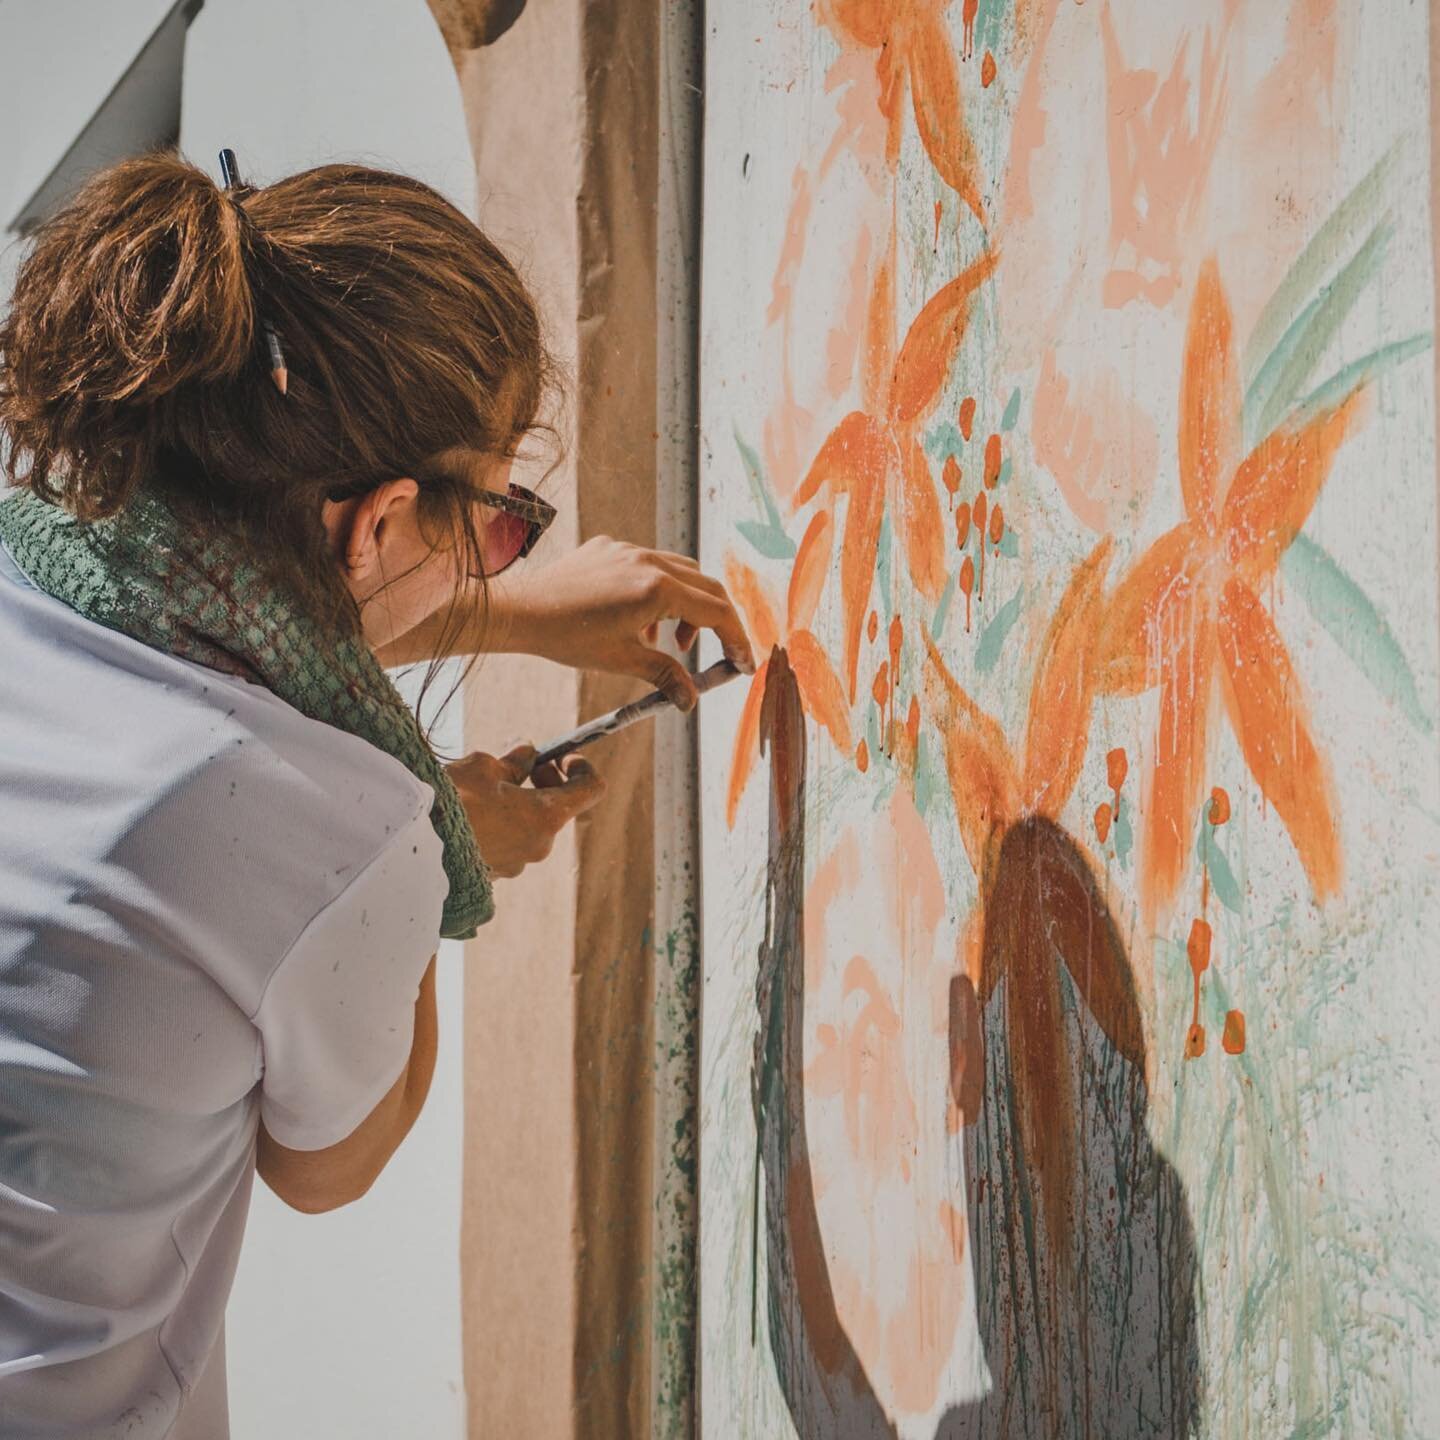 🌼🌸CHARITY AUCTION🌸🌼
Now that the time rapidly approaches to remove the boards and re-open we are looking to auction off the painted boards by local artist Hannah Browne. The boards are set to be put up for auction to the highest bidder, with all 